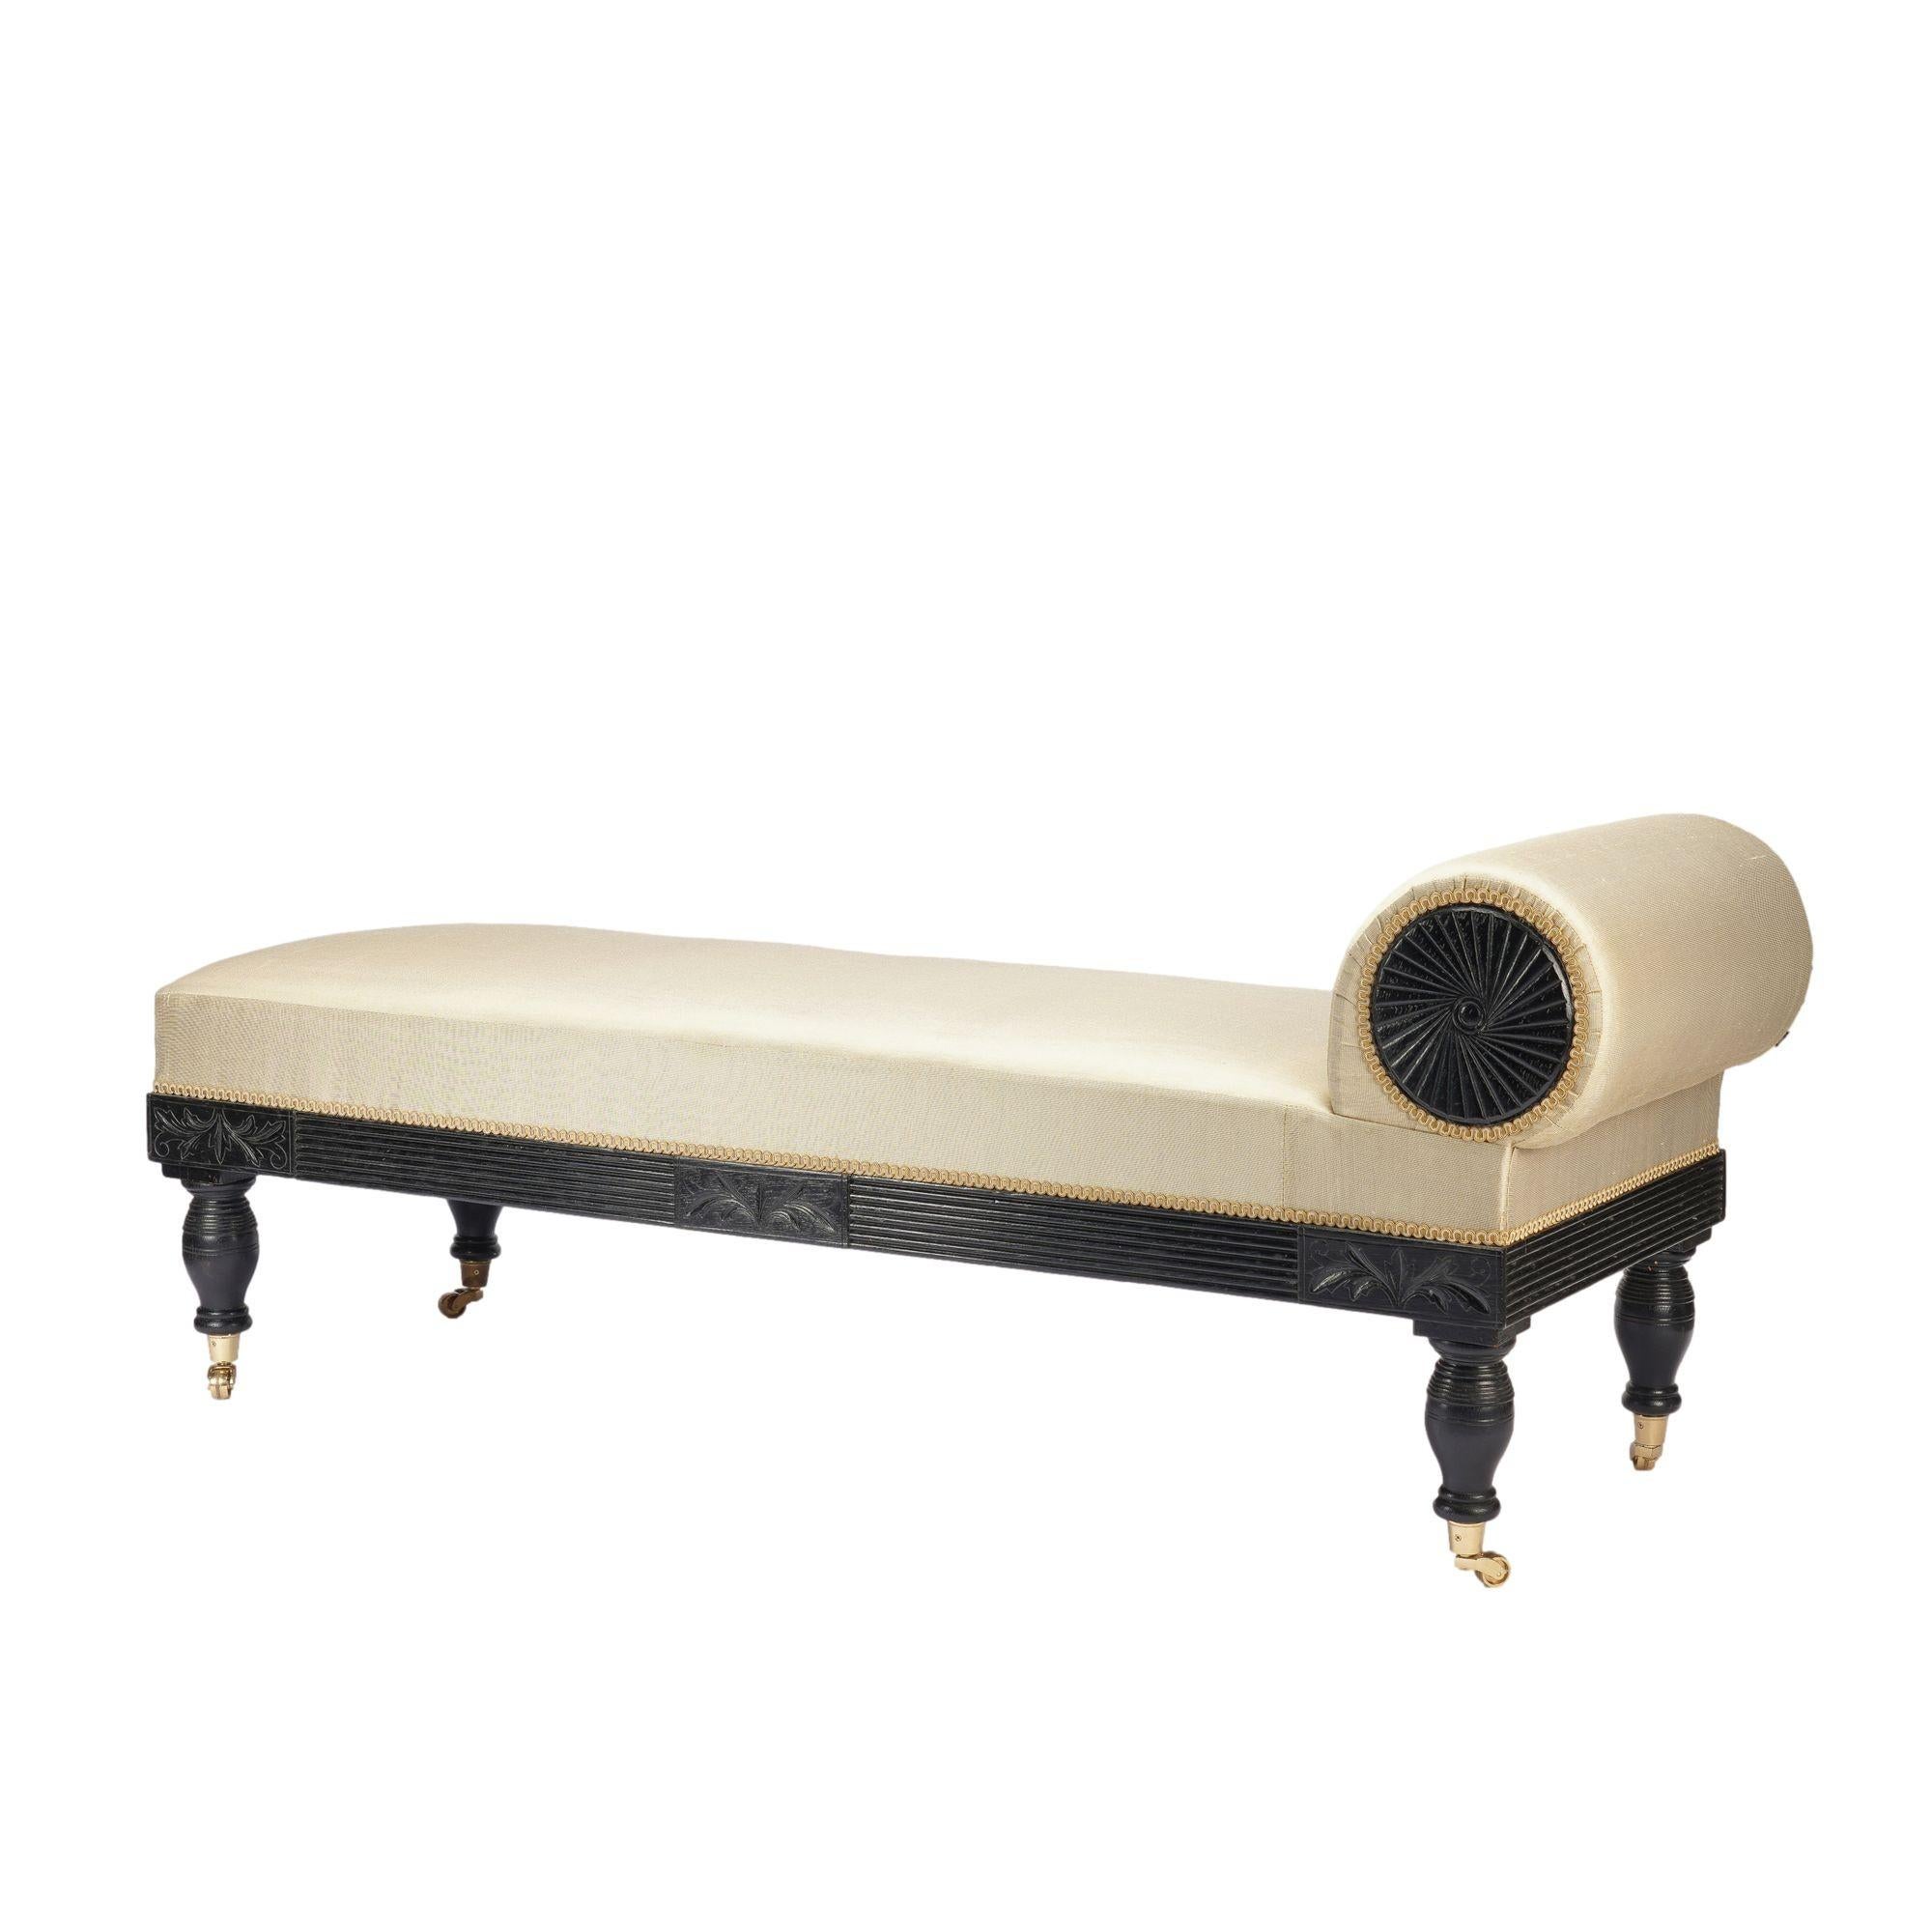 American Eastlake upholstered chaise in ebonized walnut with brass casters, 1888 In Excellent Condition For Sale In Kenilworth, IL